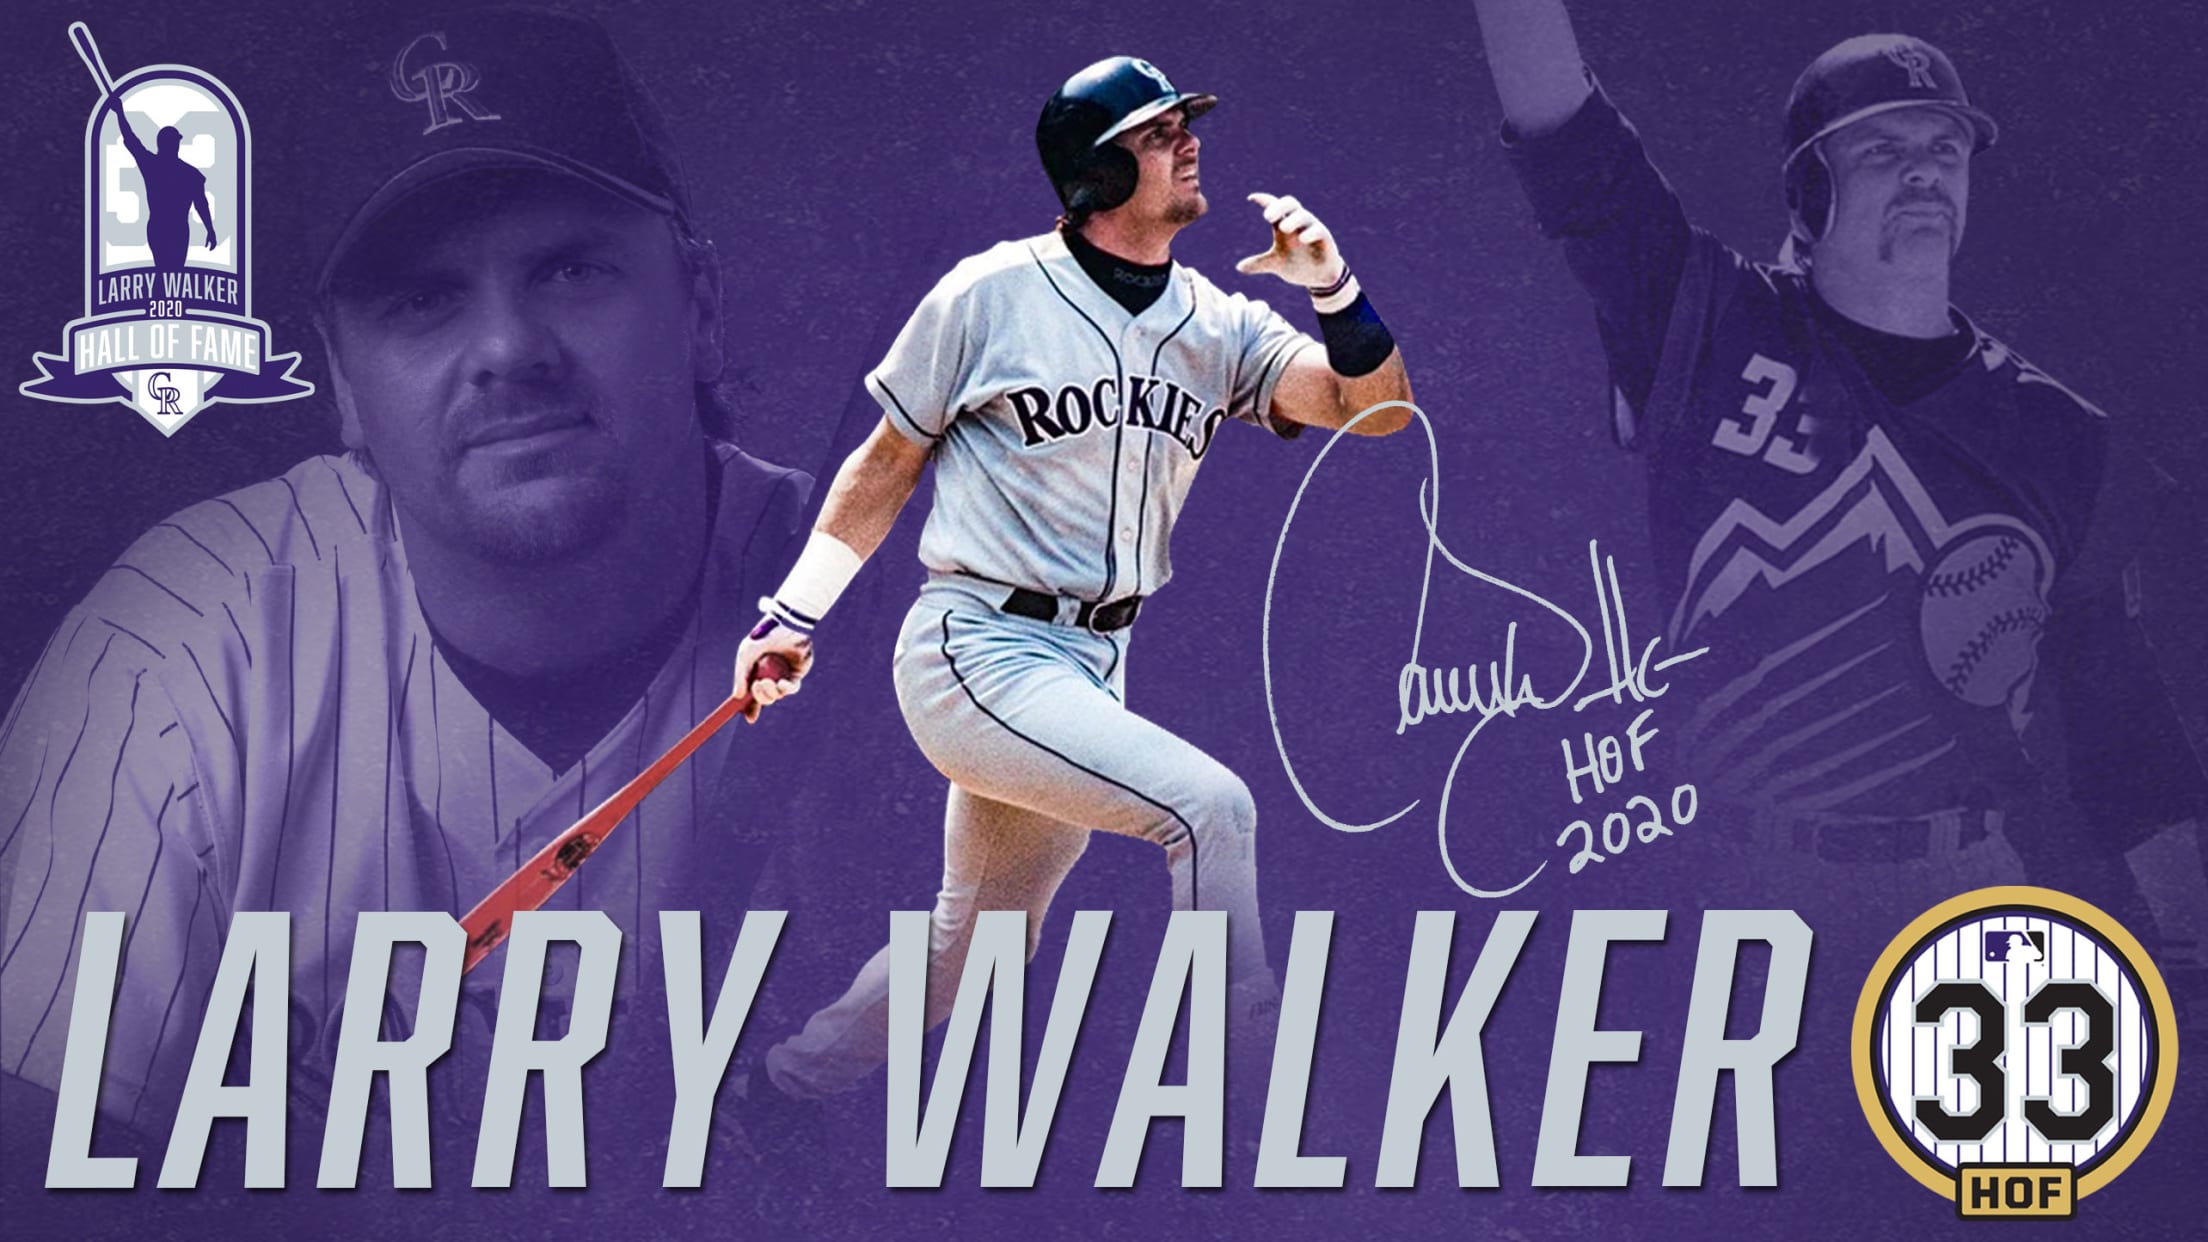 Larry Walker Colorado Rockies Autographed Game Used Road Jersey